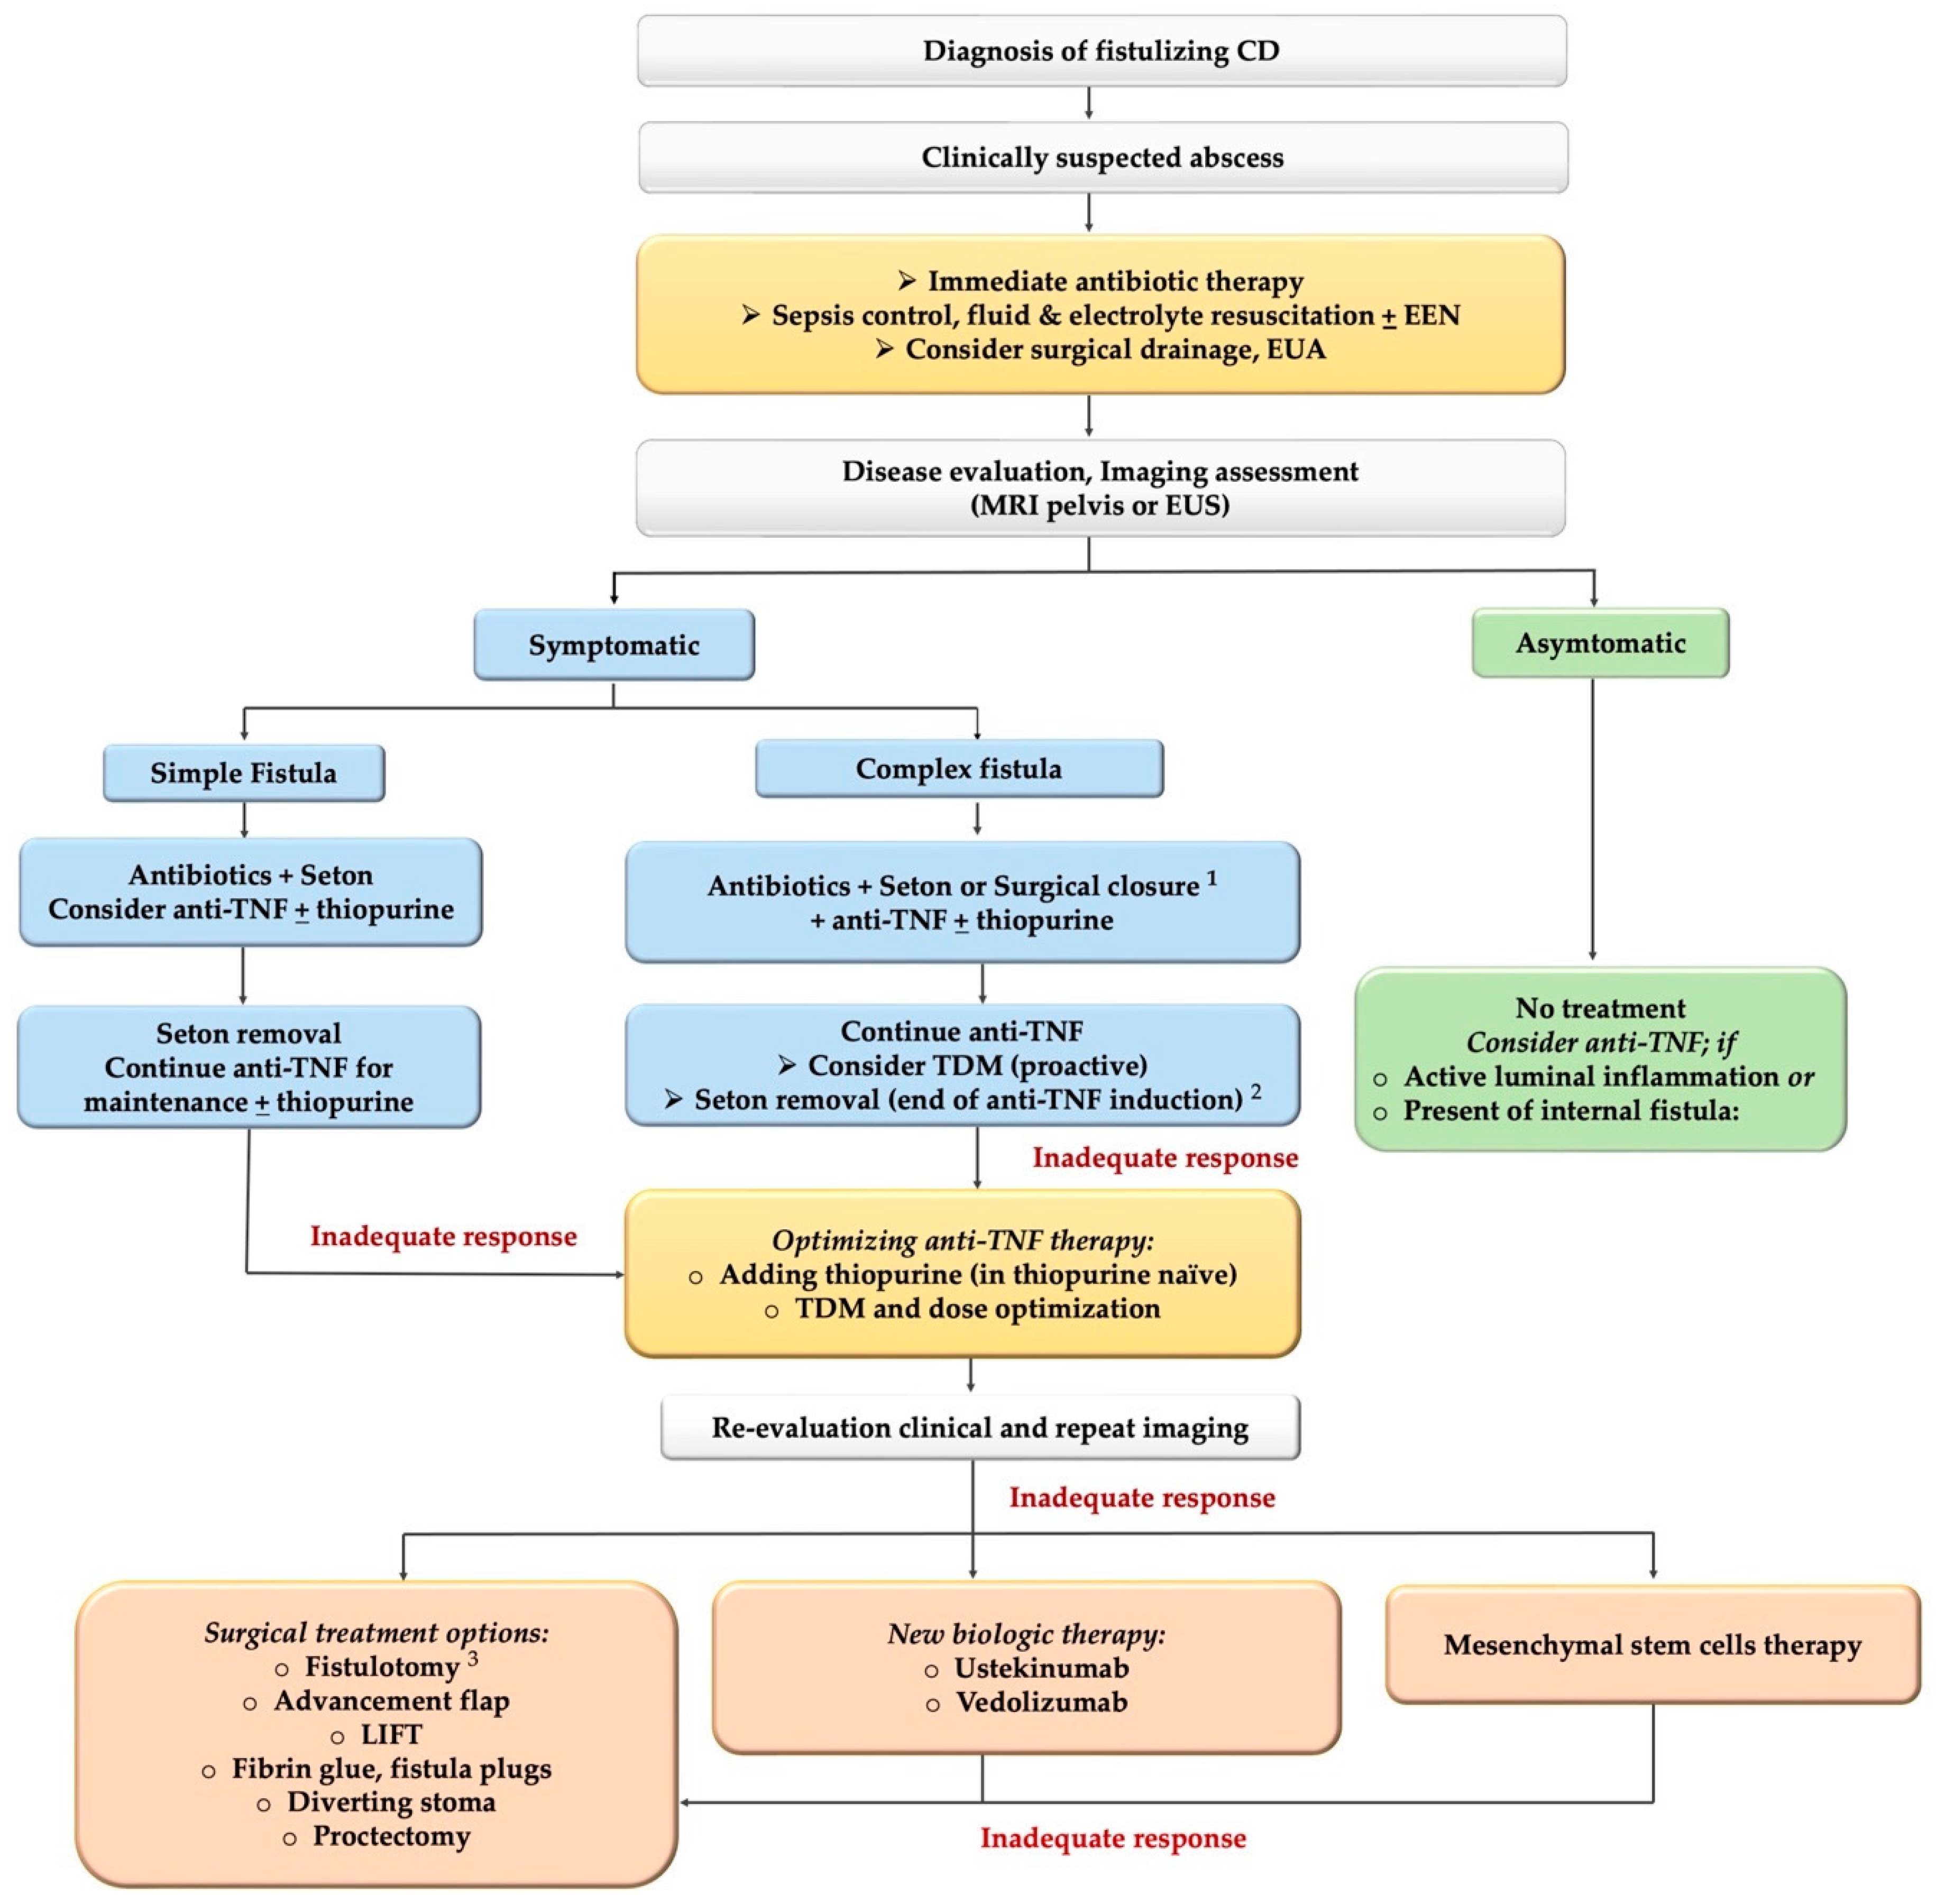 JCM | Free Full-Text | The Optimal Management of Fistulizing Crohn&rsquo;s  Disease: Evidence beyond Randomized Clinical Trials | HTML